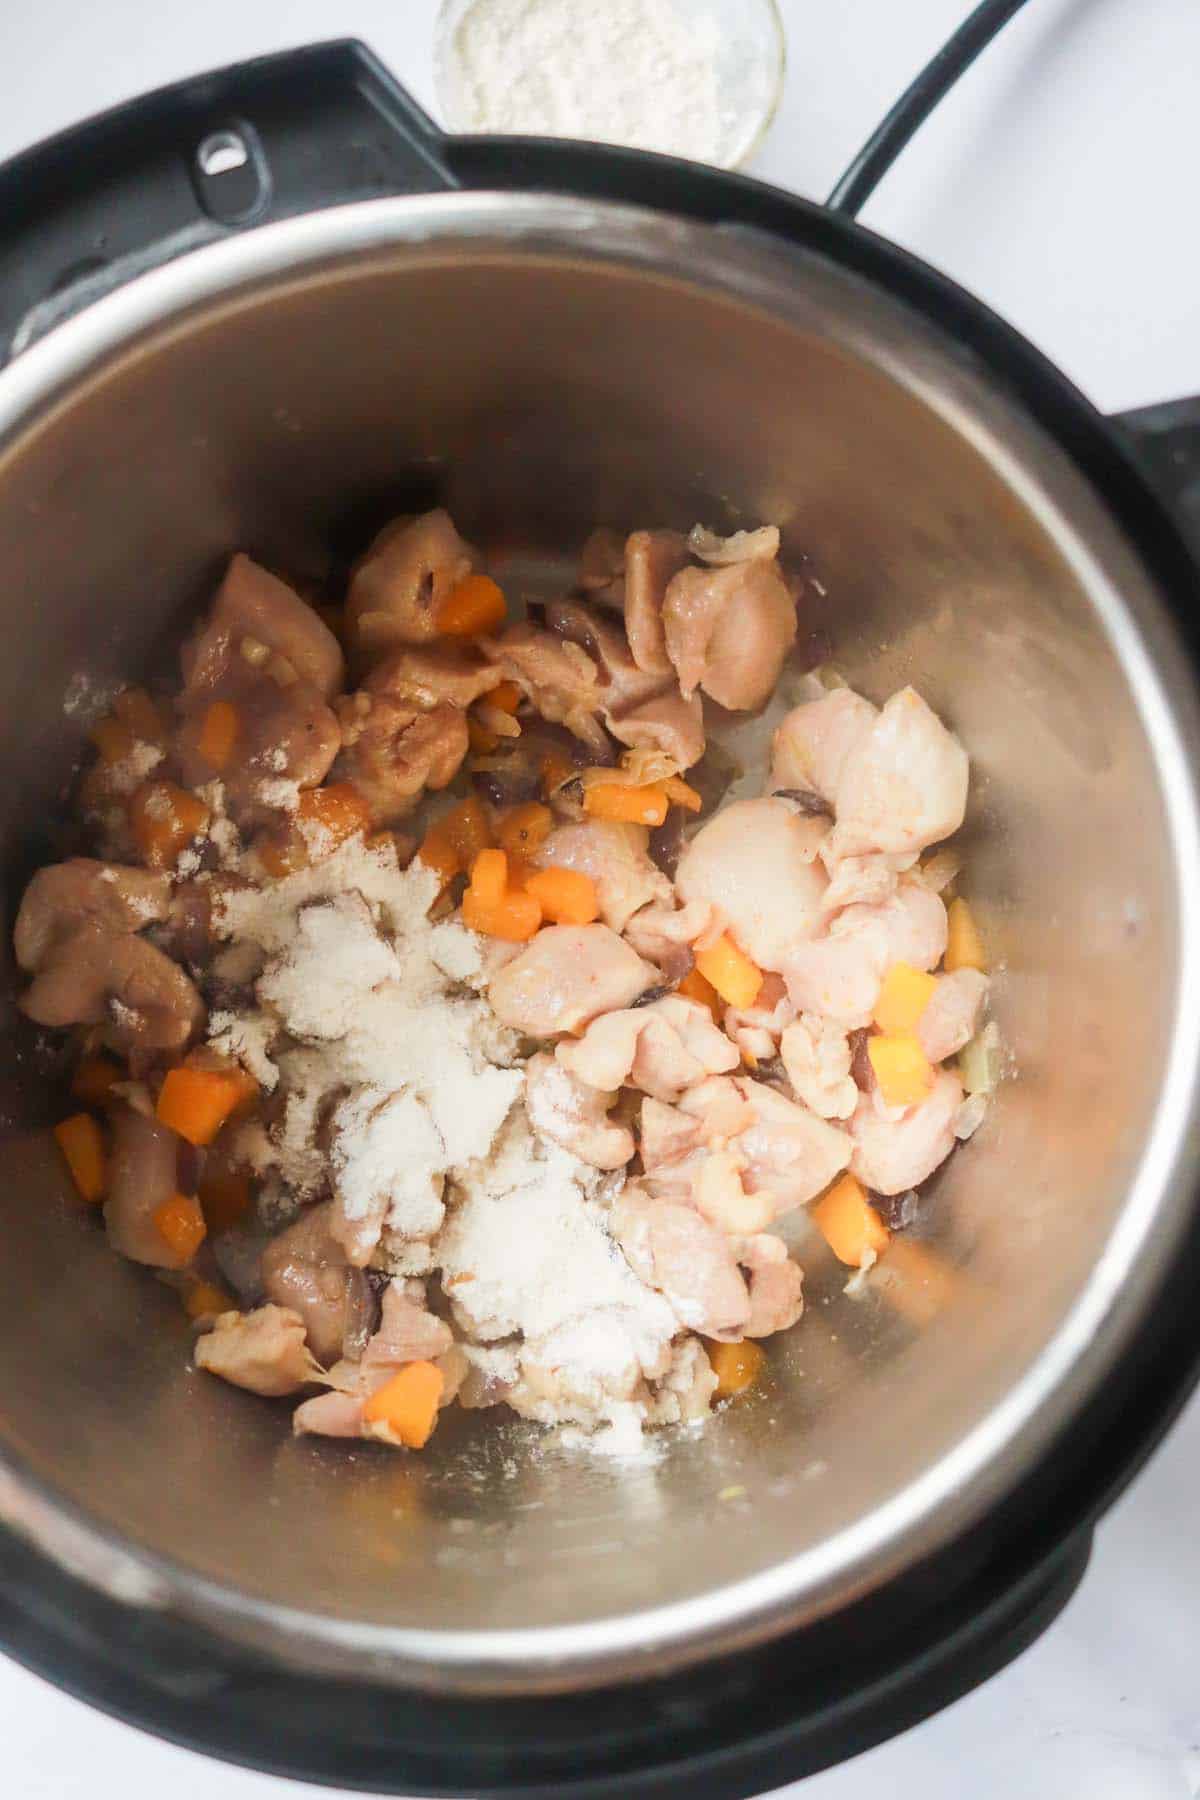 Chicken and carrots in the Instant Pot.